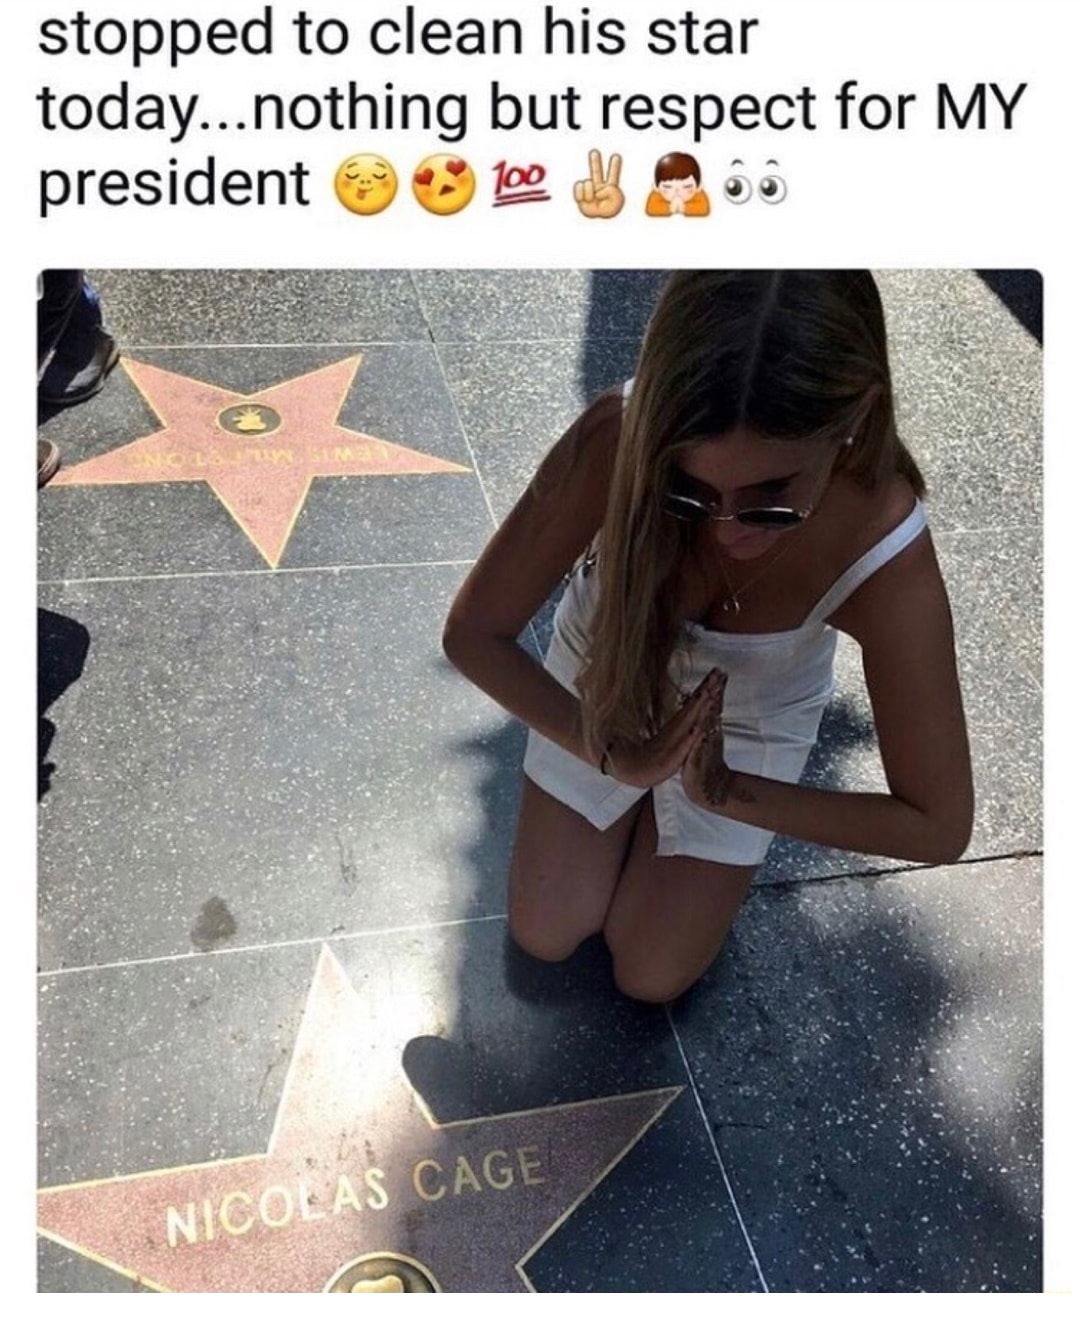 photo caption - stopped to clean his star today... nothing but respect for My president 0 100 66 O Stna Nicolas Cage